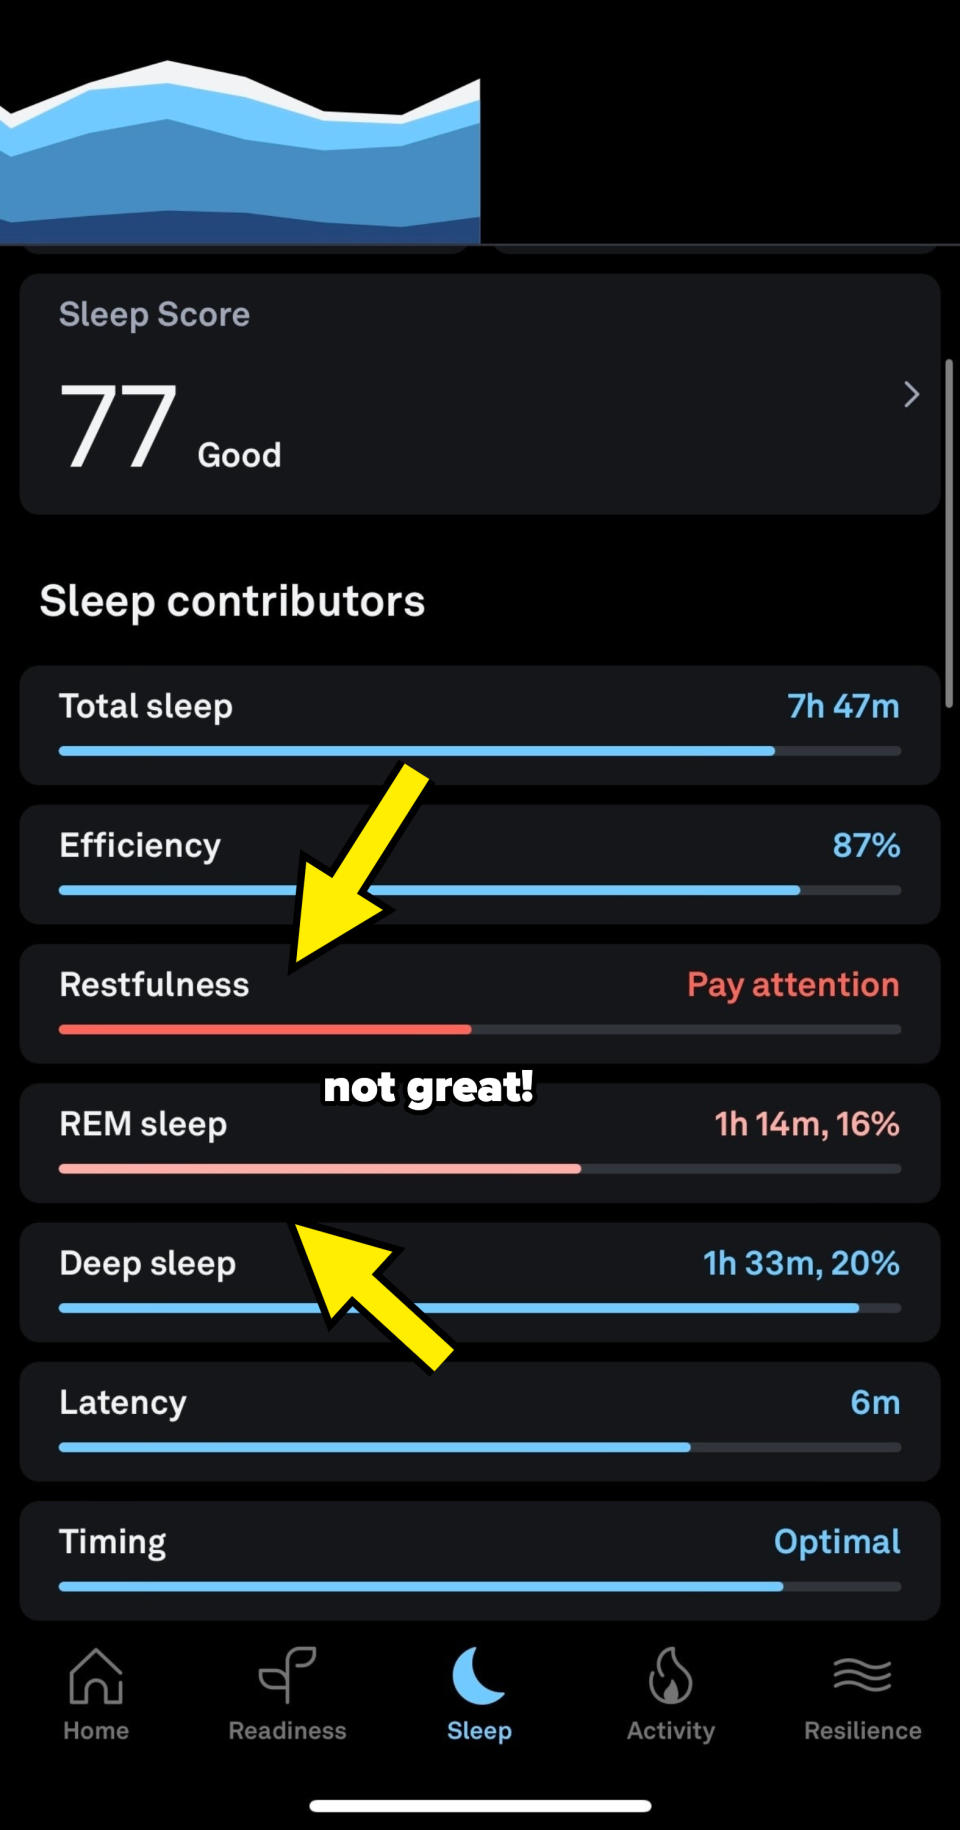 Sleep tracking app screen showing Sleep Score as 'Good' at 77, with detailed sleep stage breakdown and timing